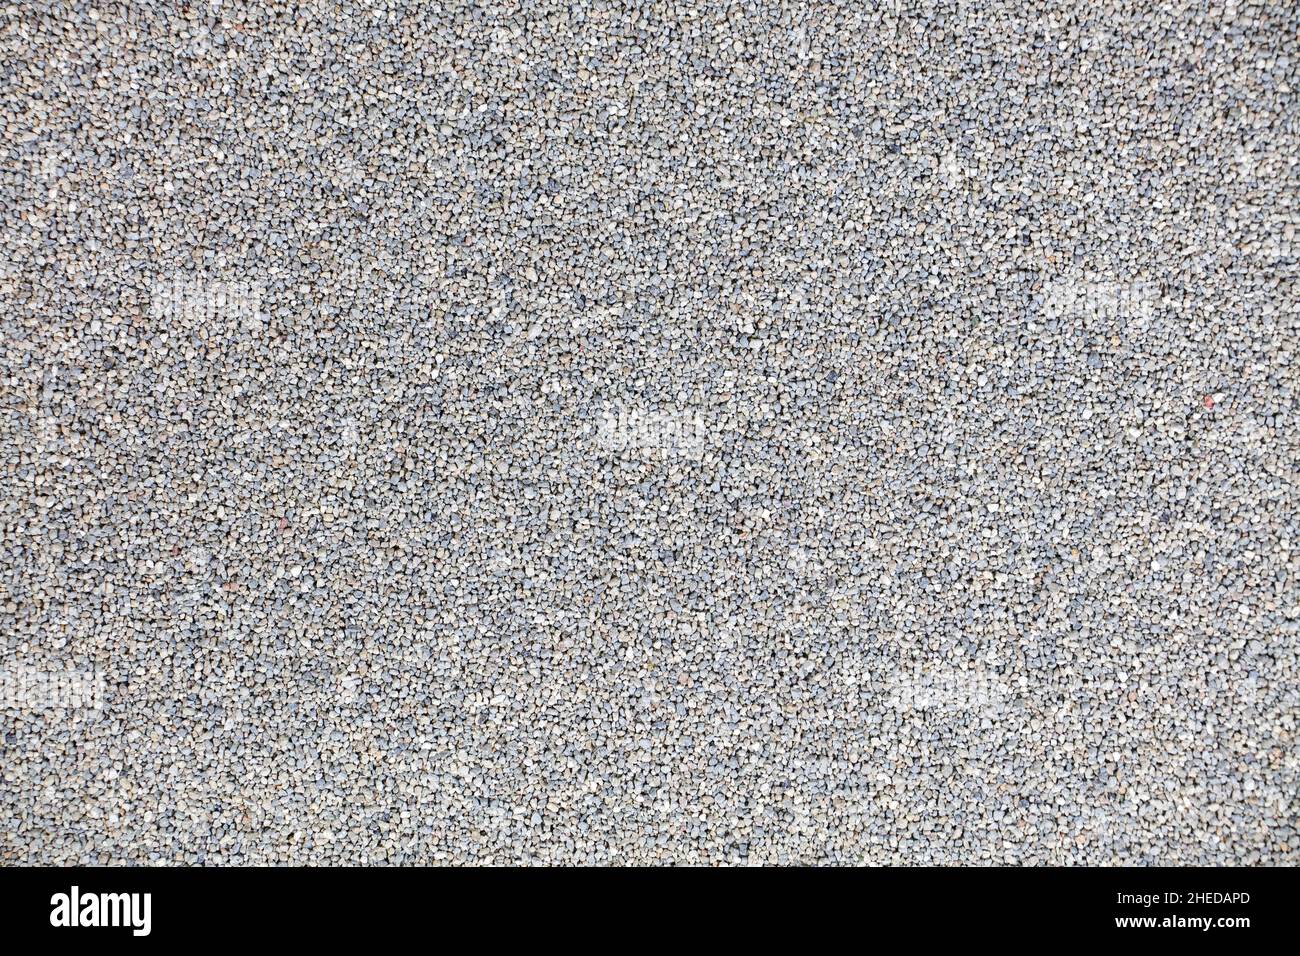 Grey clumping cat litter background texture image Stock Photo